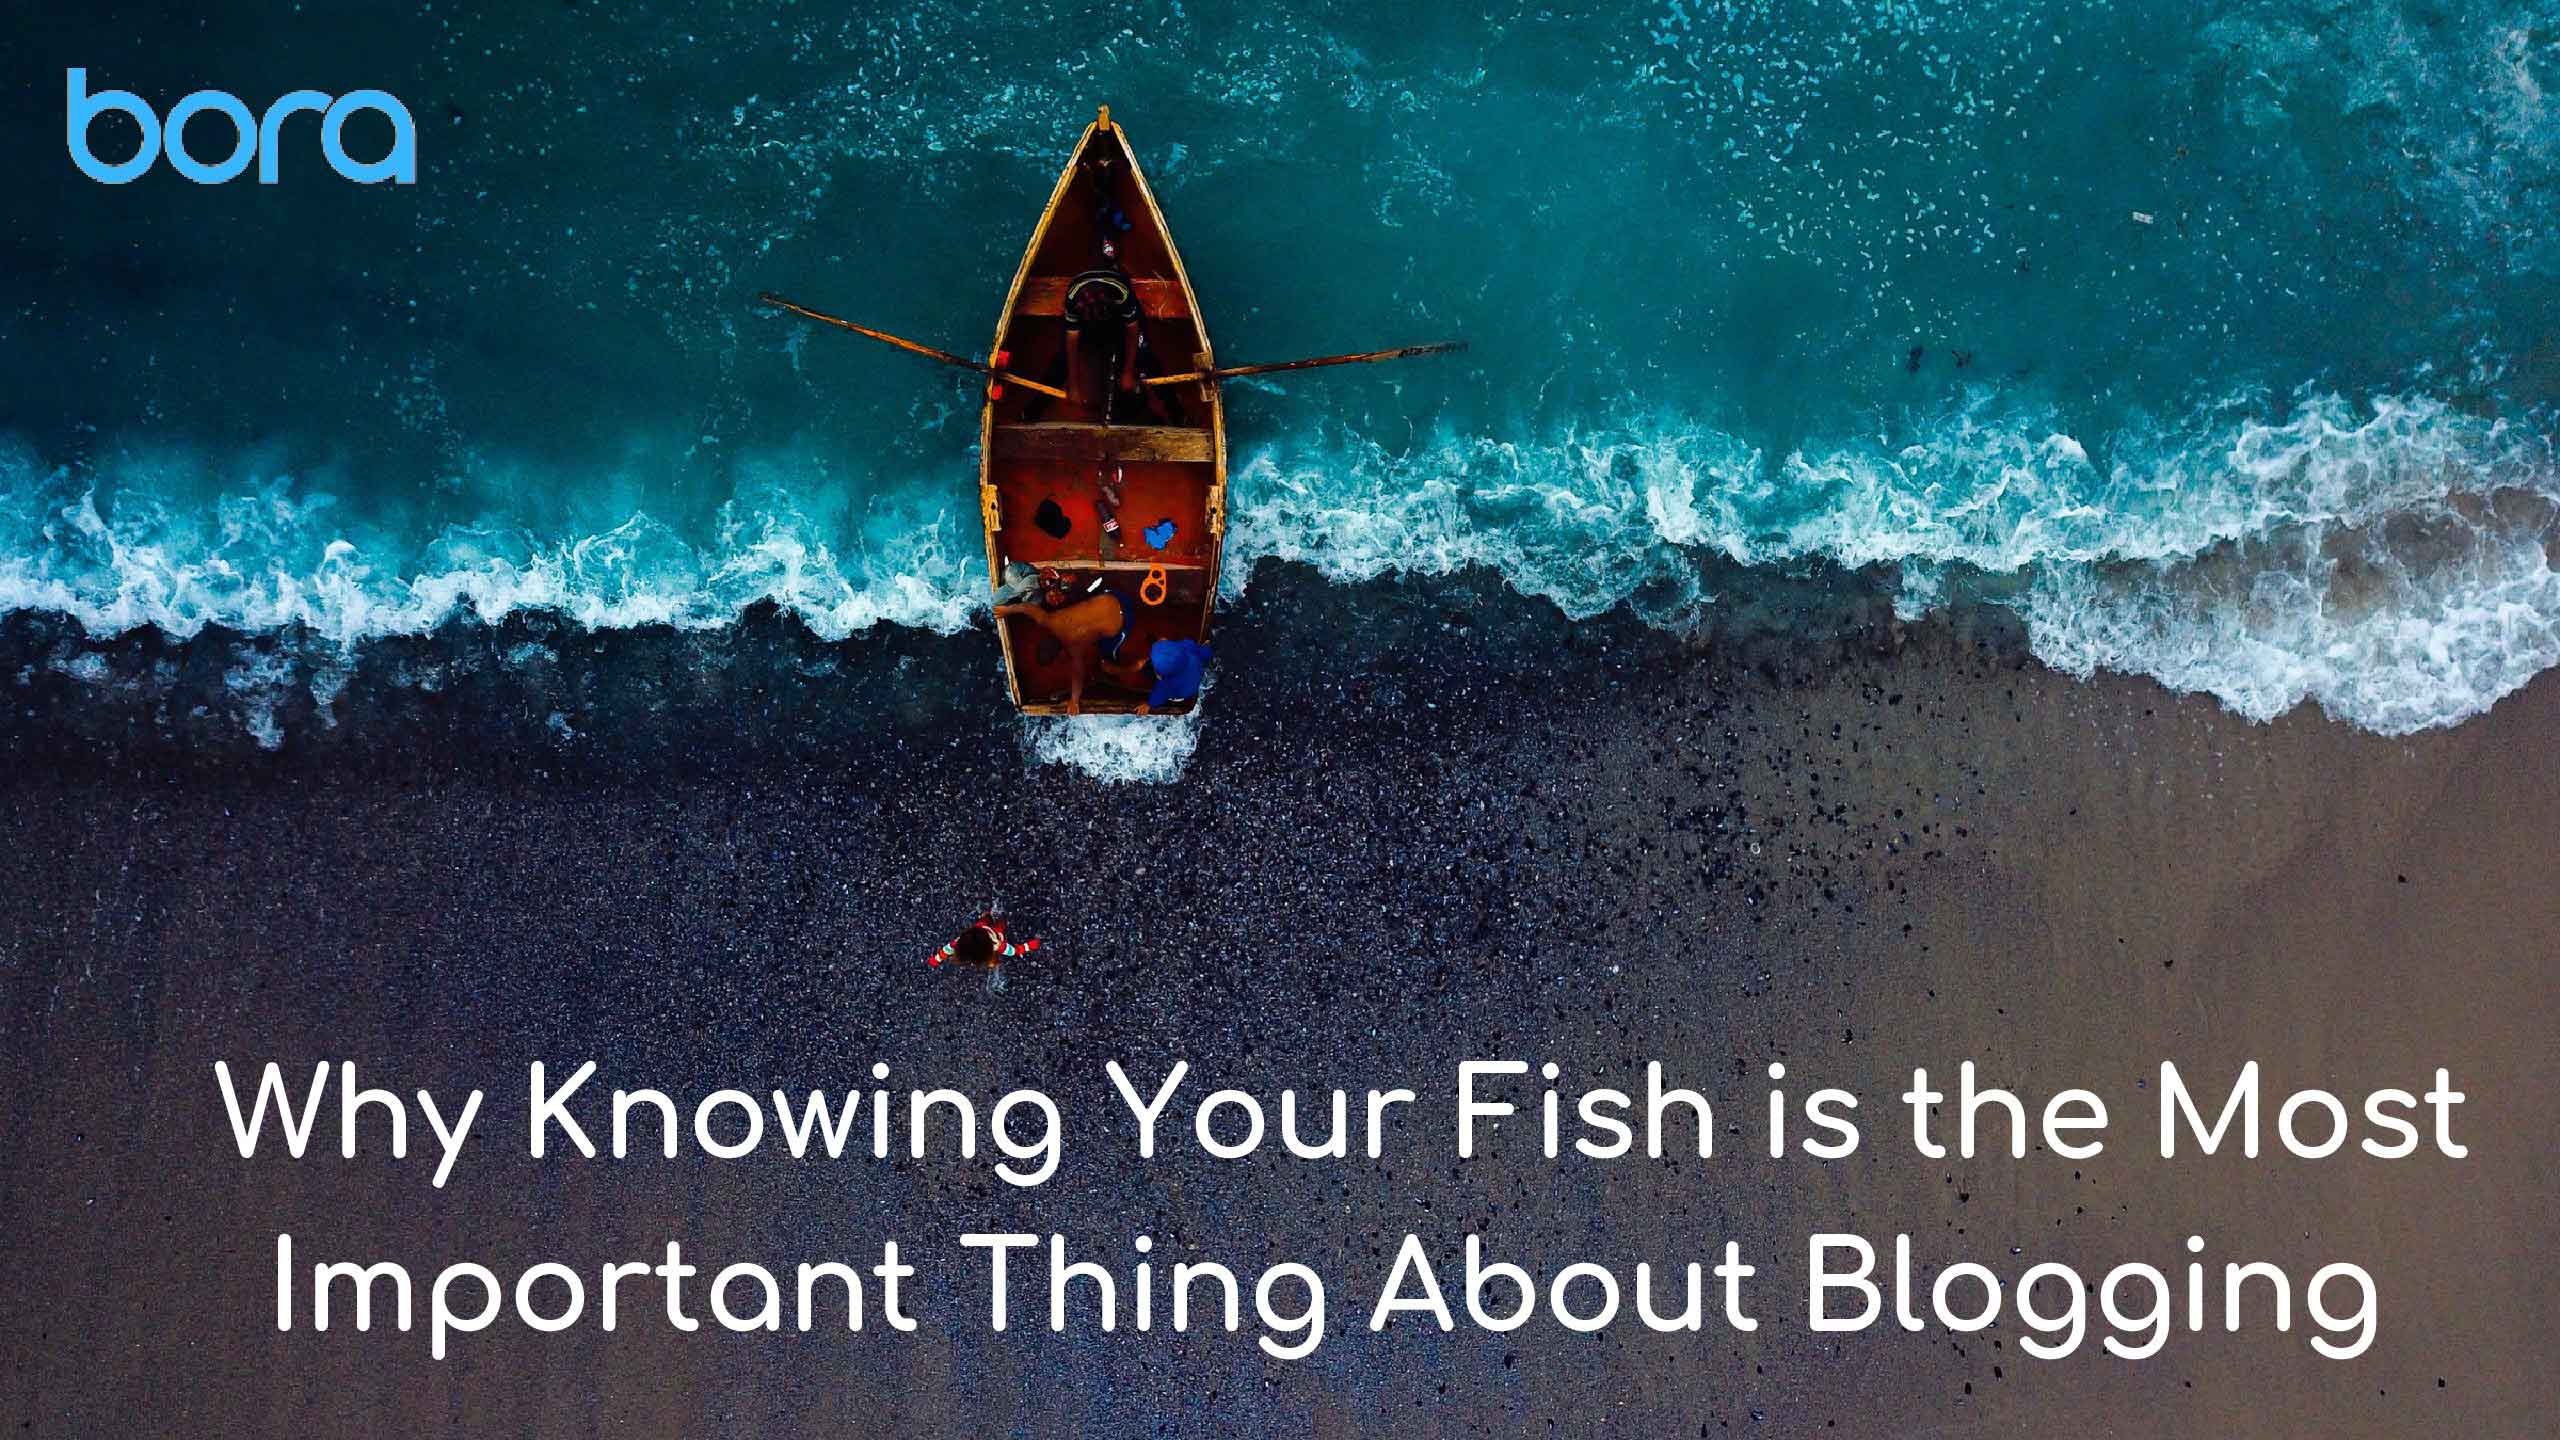 Why Knowing Your Fish is the Most Important Thing About Blogging